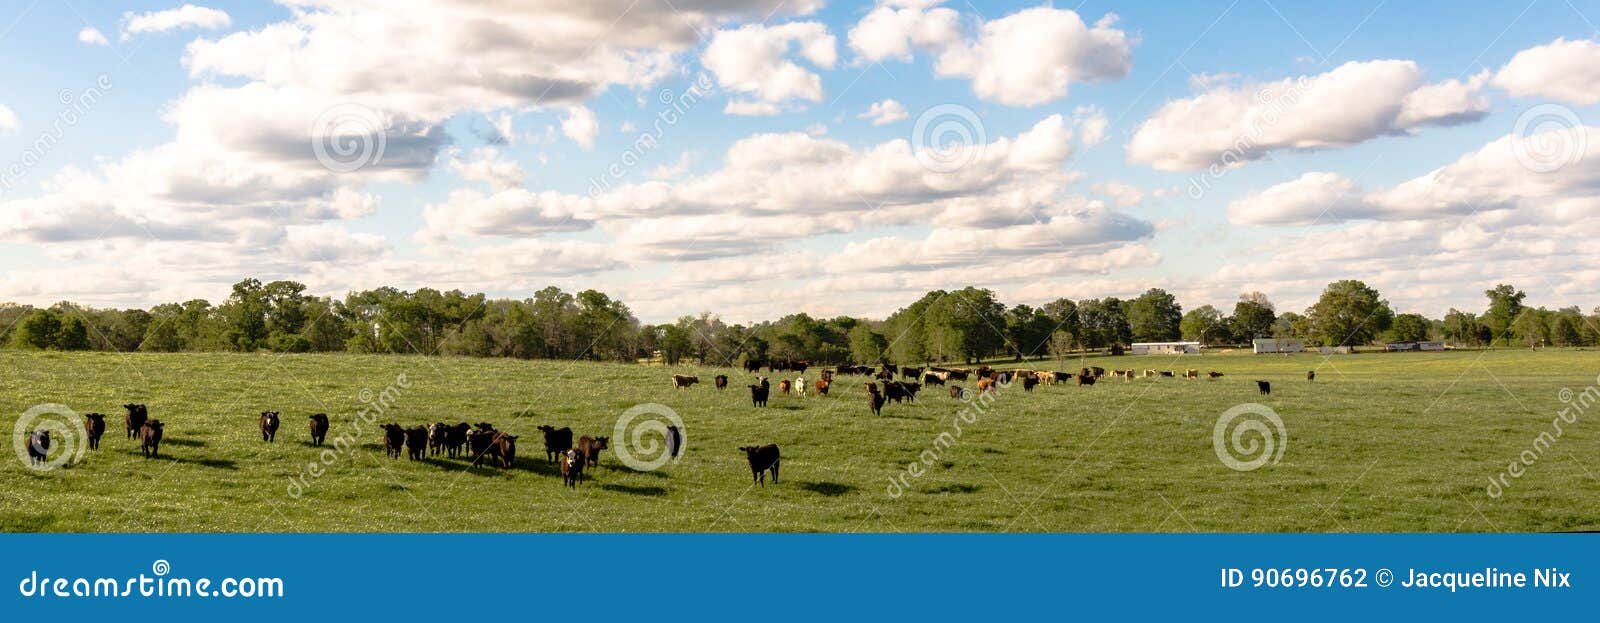 country panorama of cattle in lush pasture